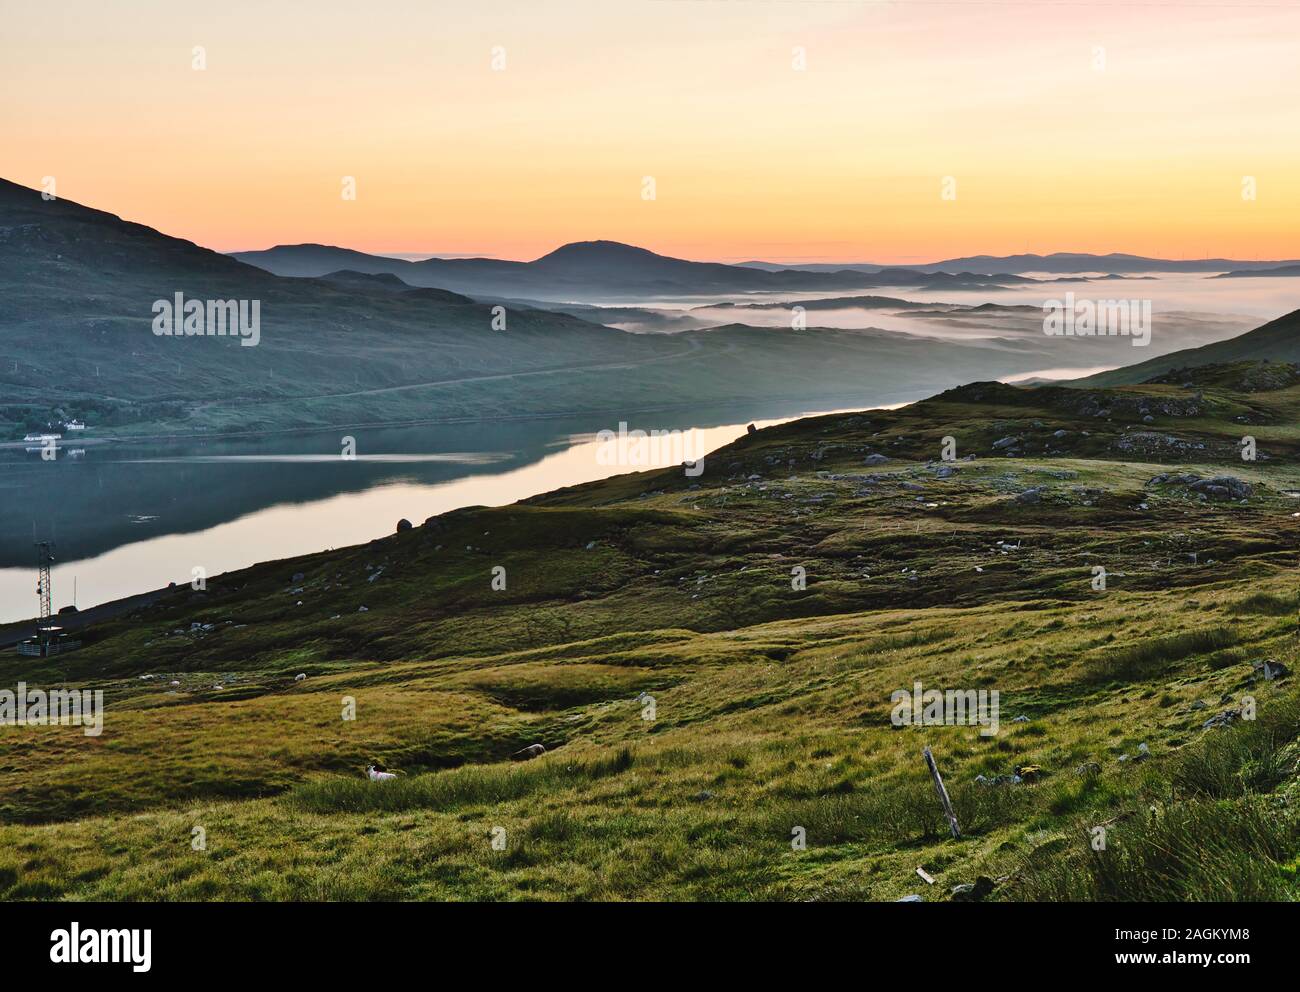 Wild and remote misty Scottish landscape at dawn on the Isle of Lewis, Outer Hebrides, Scotland Stock Photo